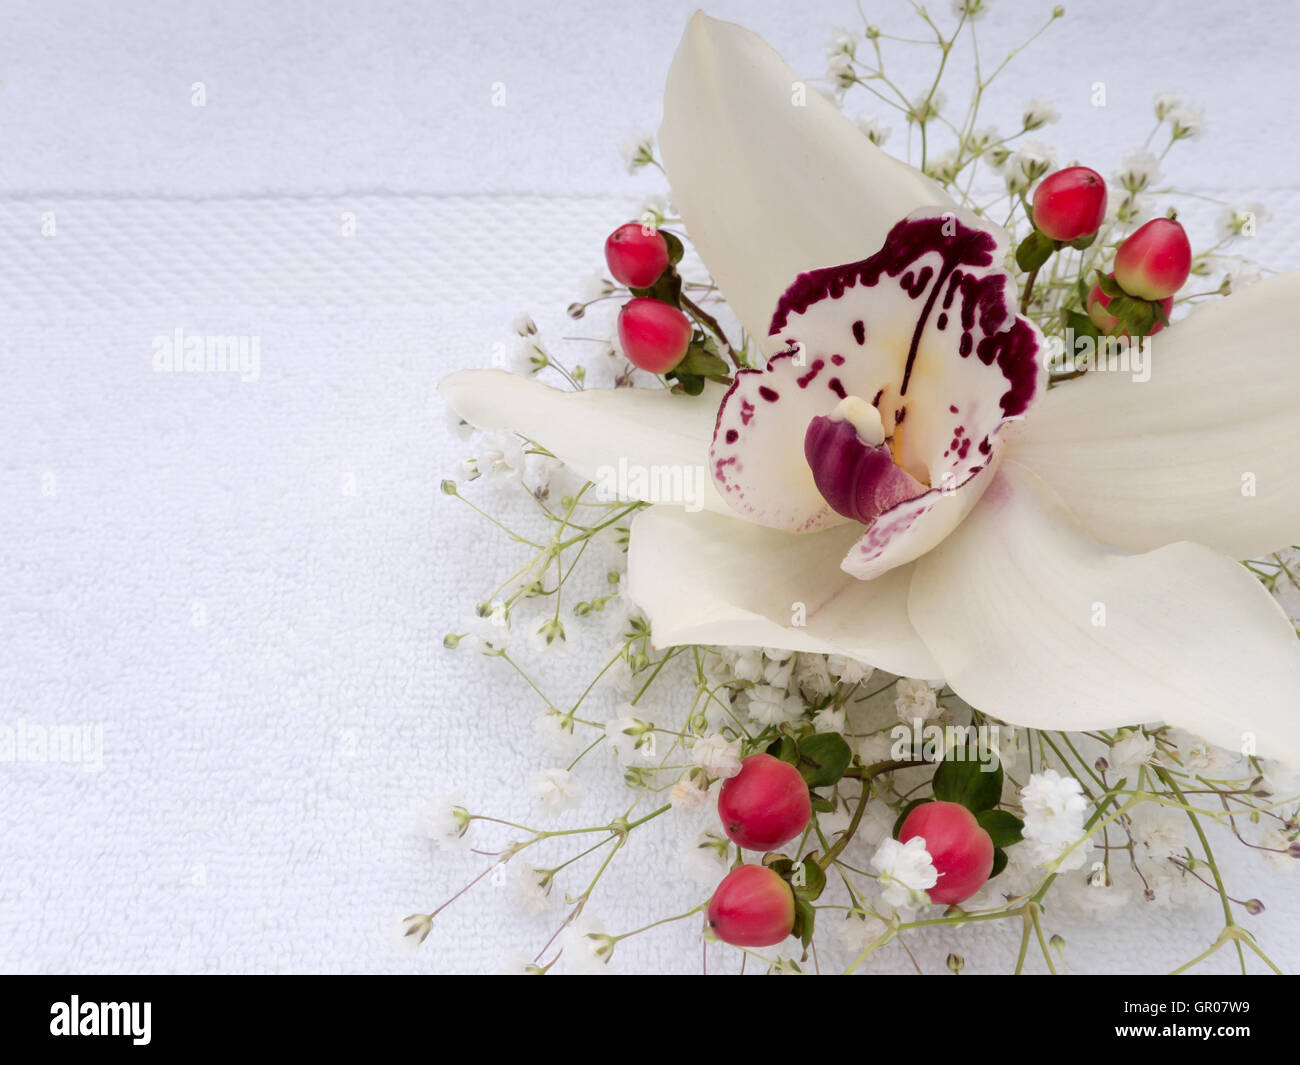 White orchid flower, hypericum red berries and gypsophila on the white terry towel Stock Photo